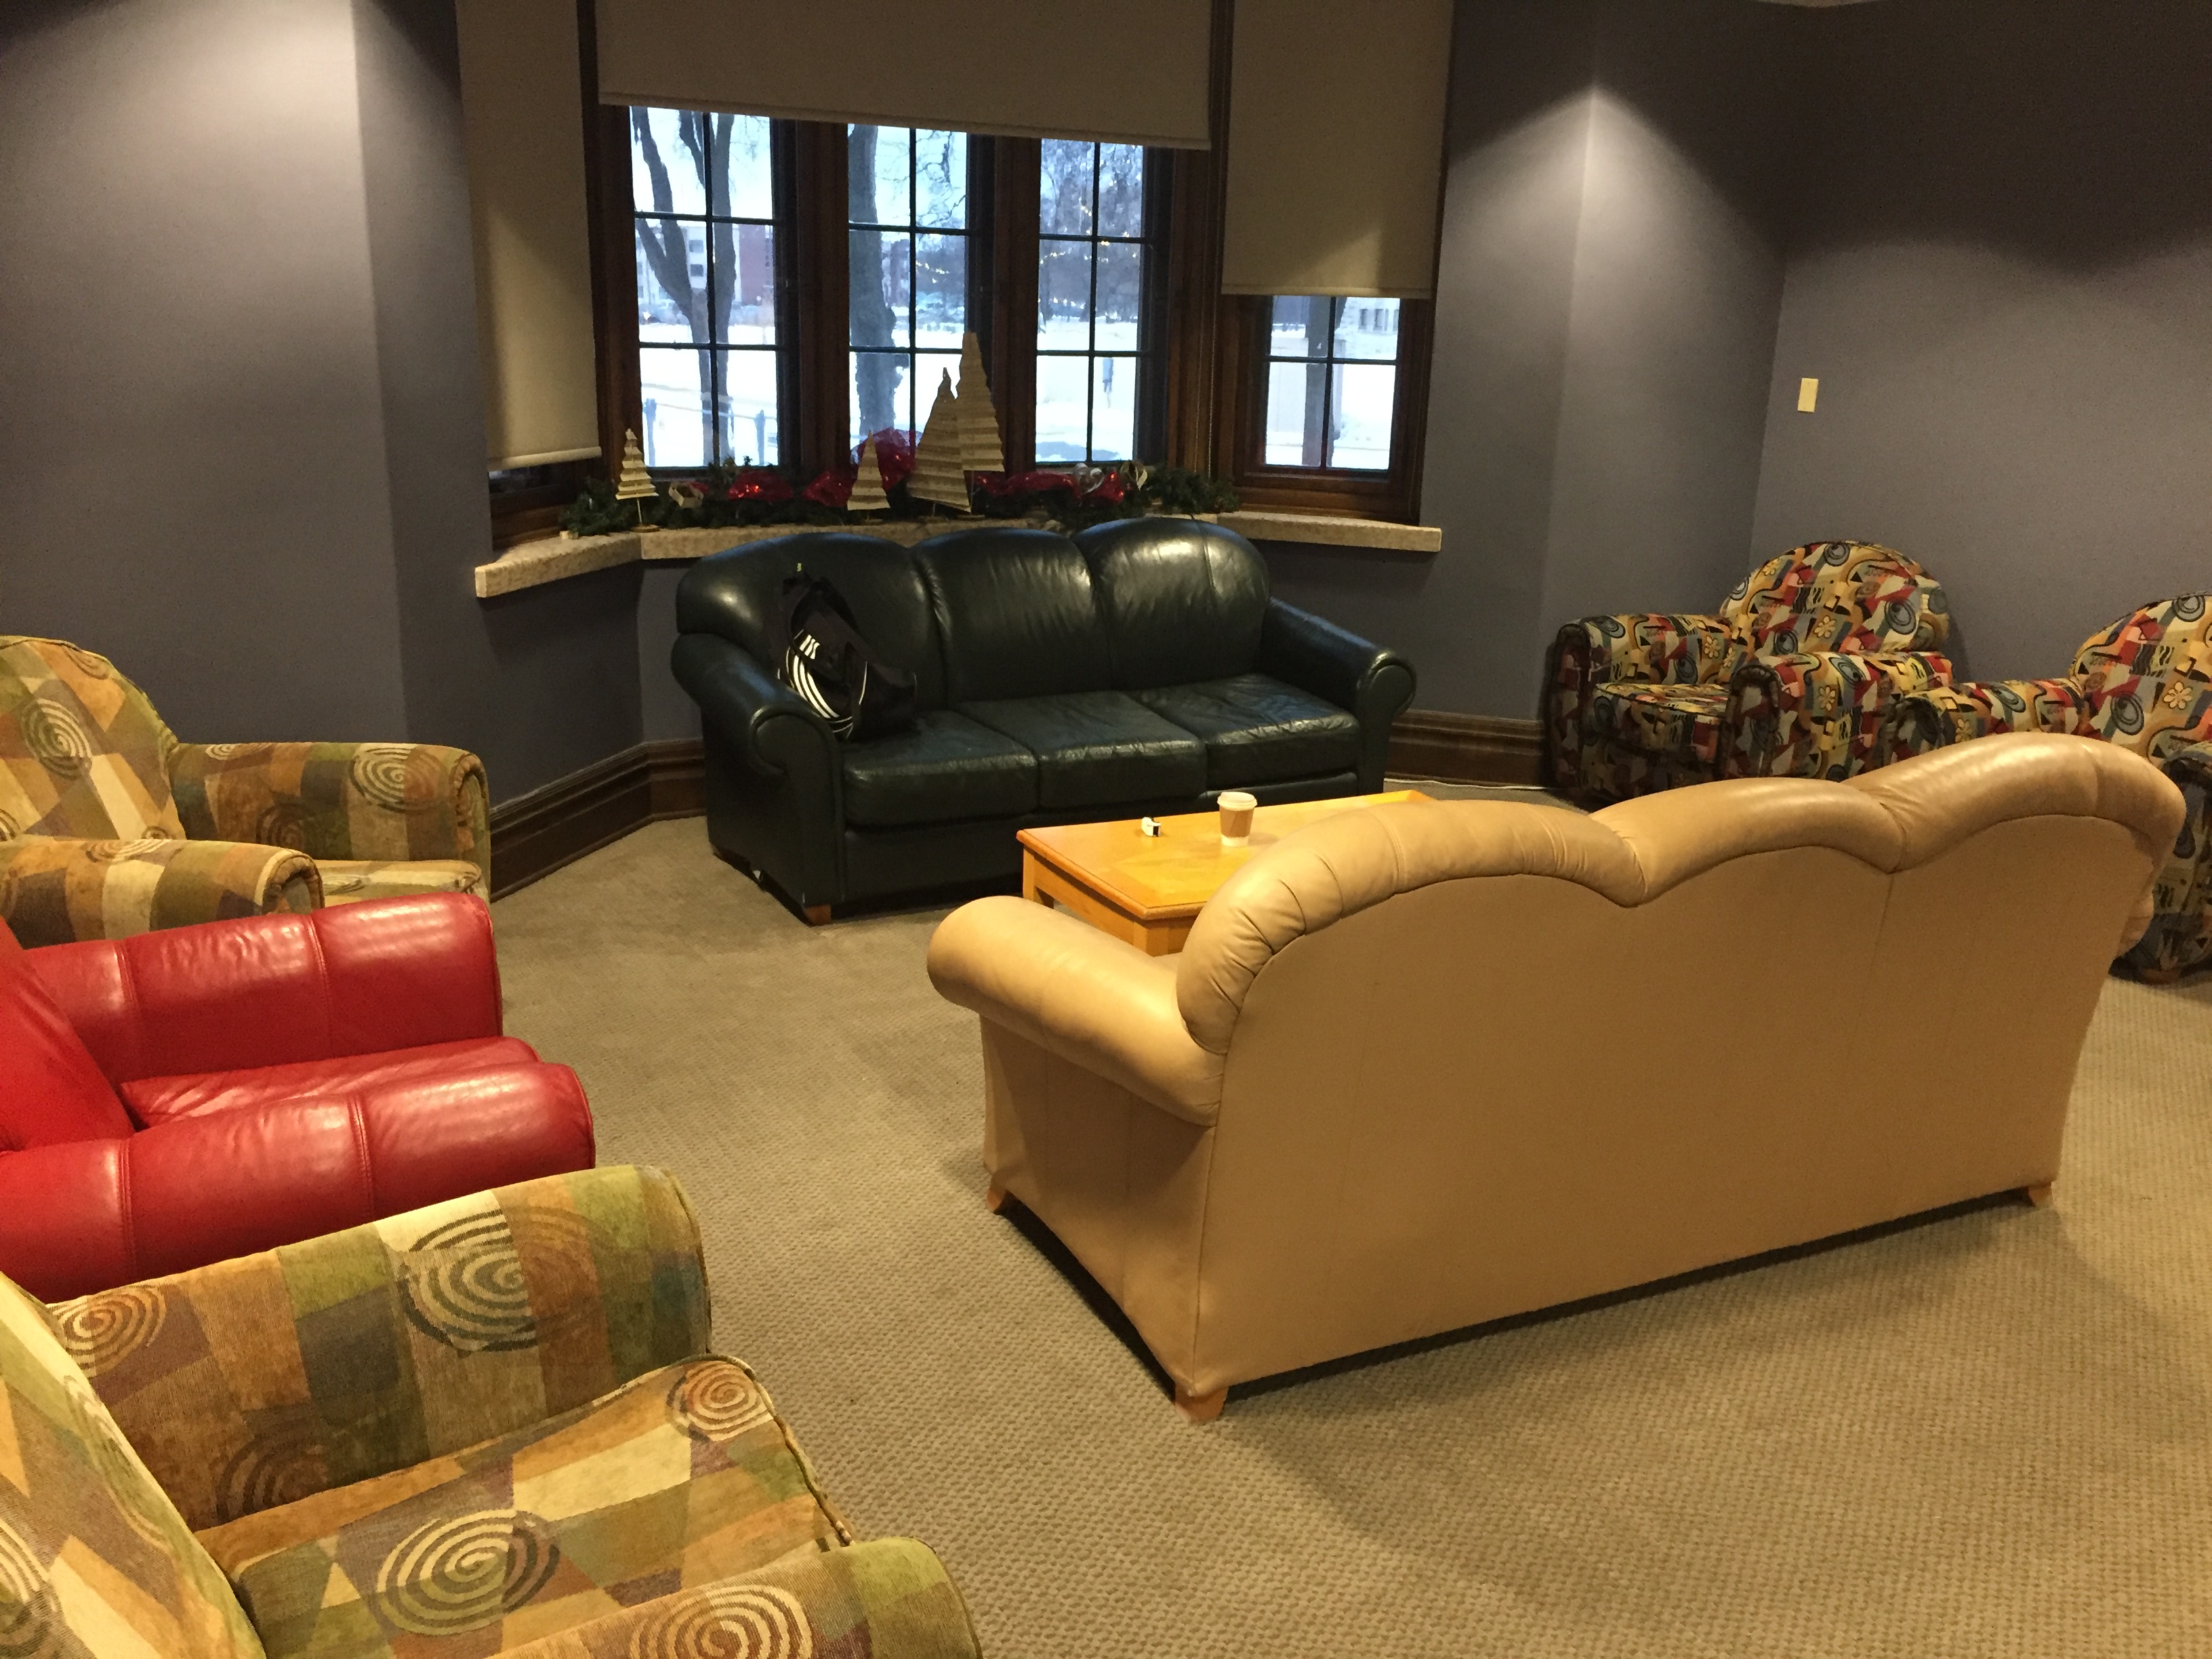 North Campus Lounges - The Pros and Cons of CMU’s Many Study Spaces